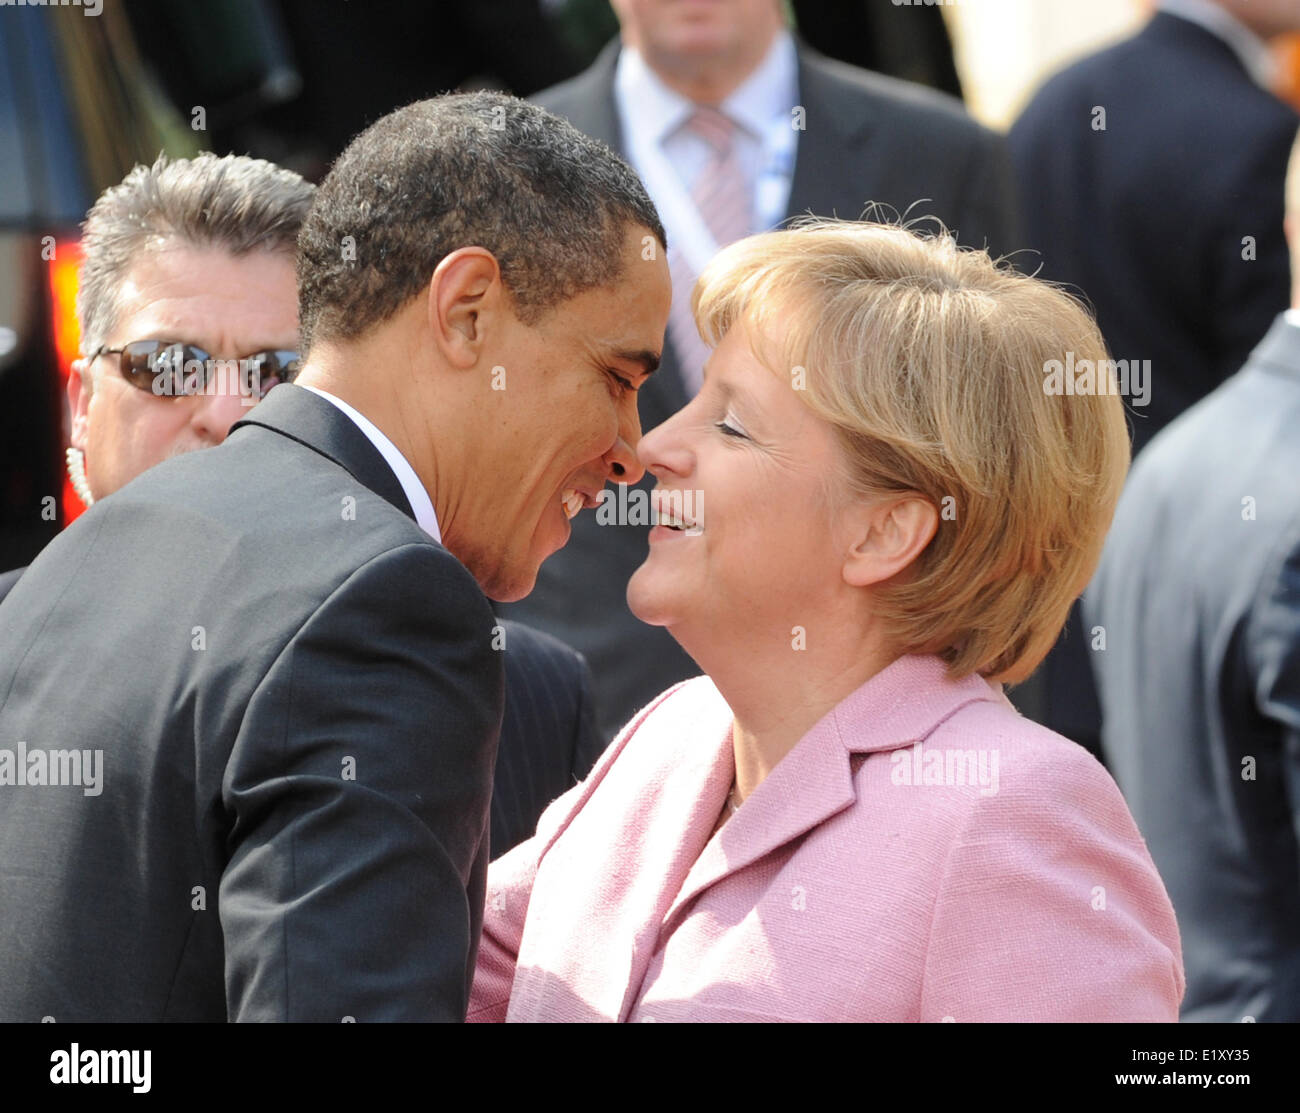 German chancellor Angela Merkel welcomes US president Barack Obama in Baden-Baden on the 3rd of April in 2009, where the NATO summit will take place. Stock Photo